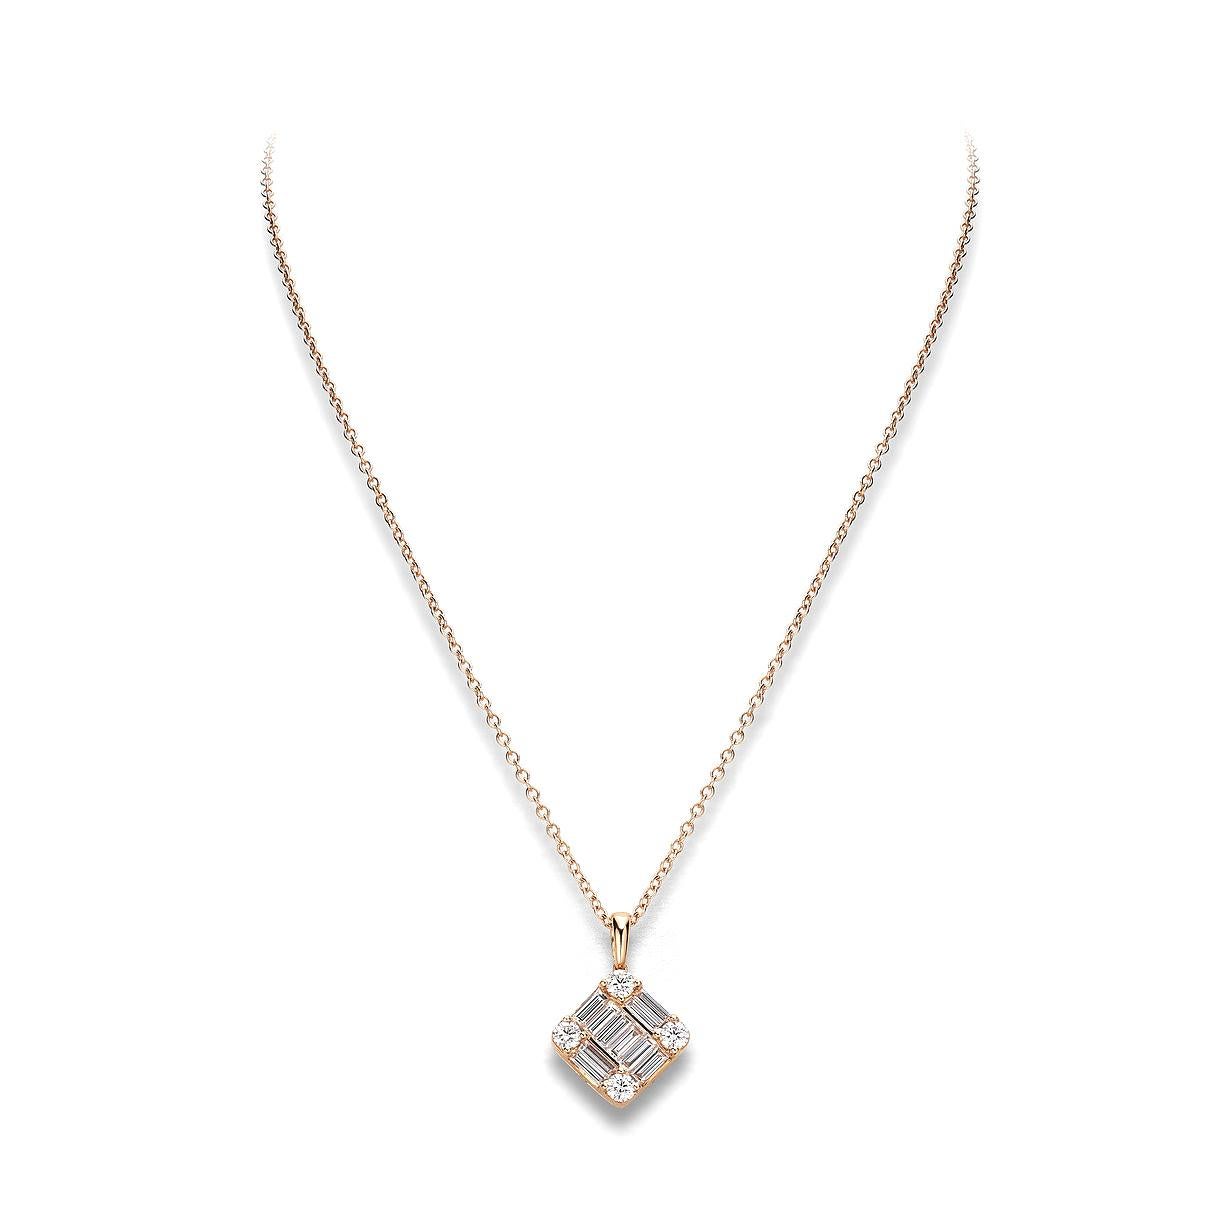 Pendant in 18kt pink gold set with 4 diamonds 0.39 cts and 10 baguette cut diamonds 0.74 cts         